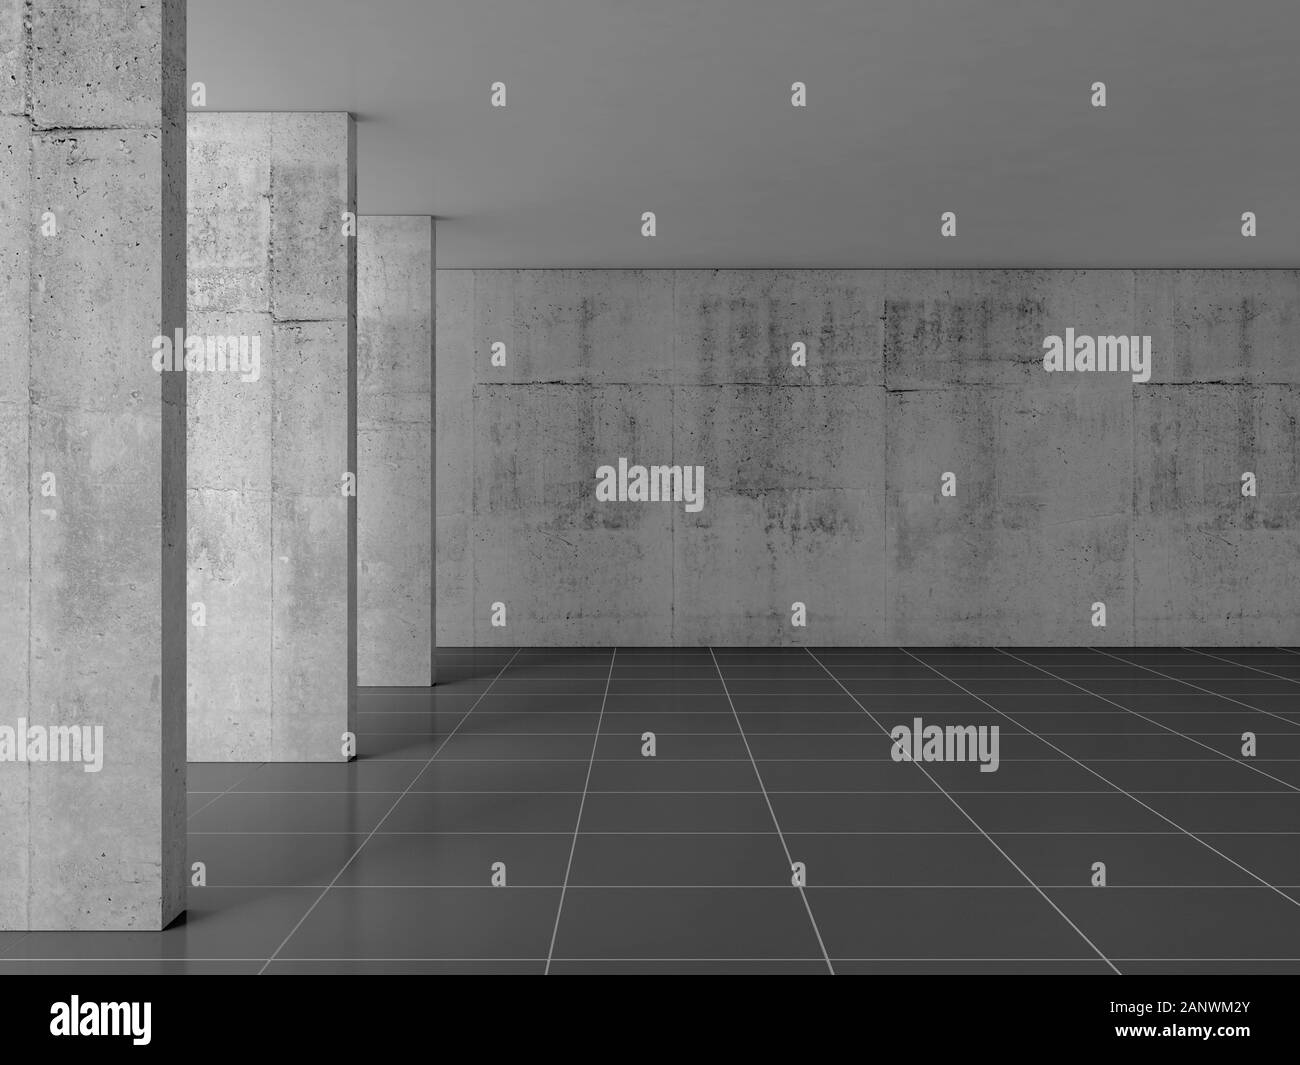 Abstract empty concrete room interior with columns and black floor tiling, 3d rendering illustration Stock Photo